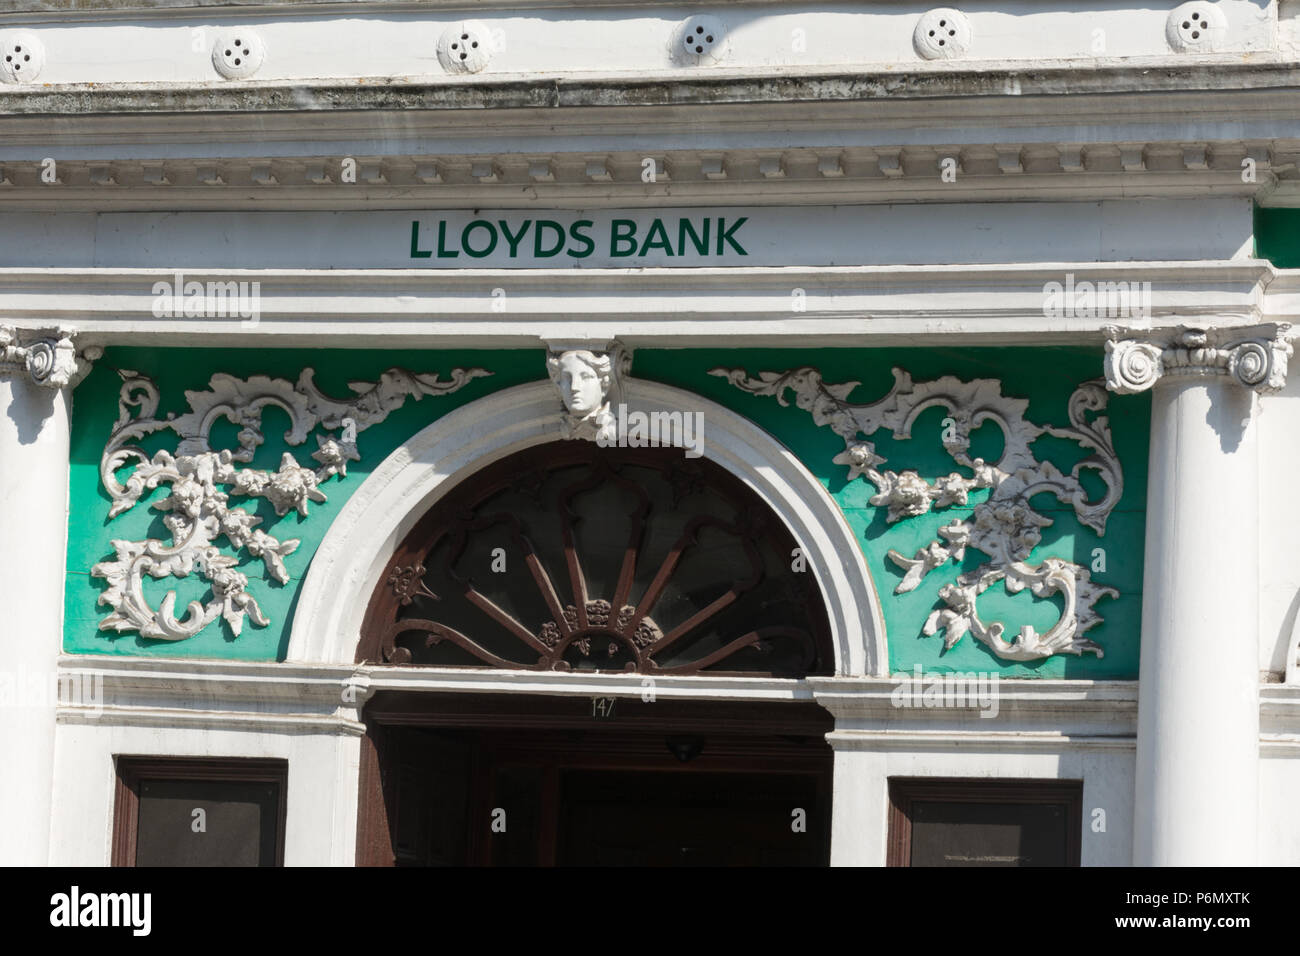 Detail of the decorative exterior of the Lloyds Bank branch on the high street in Guildford, Surrey, UK Stock Photo